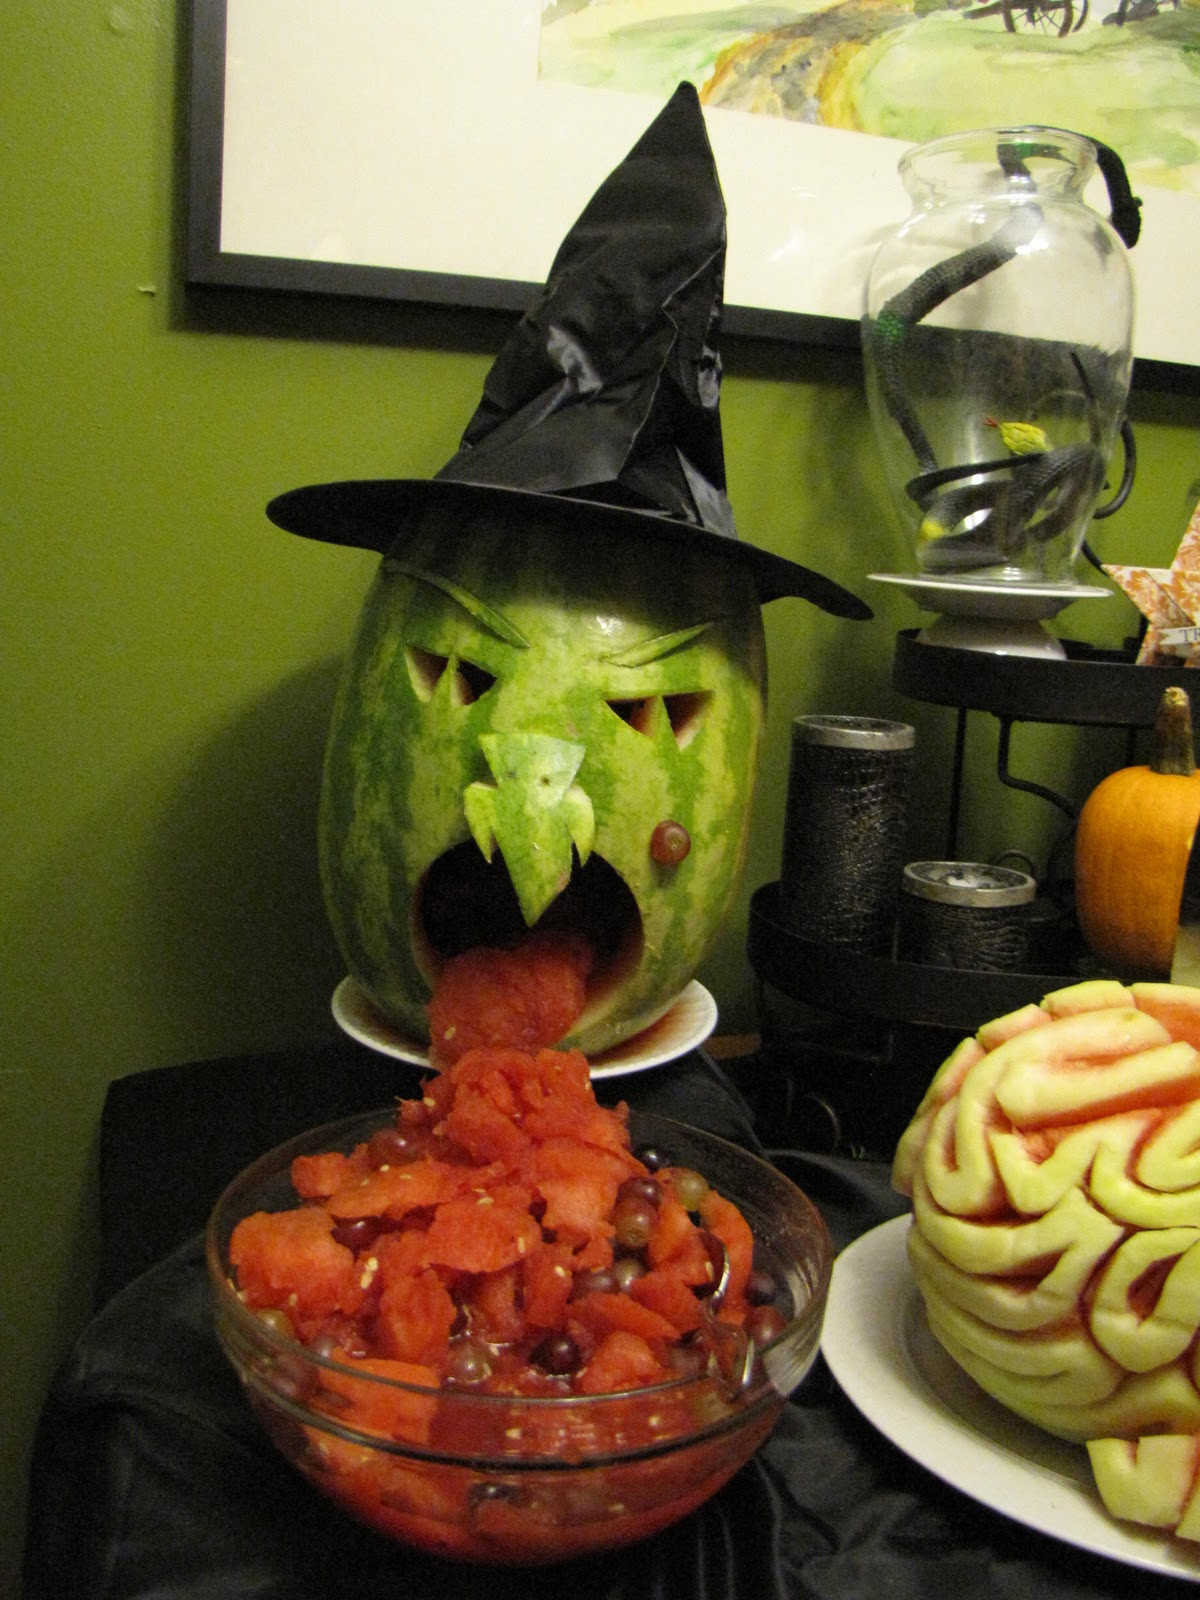 Gross Ideas For Halloween Party
 Liddy B and me Halloween Food Sculptures